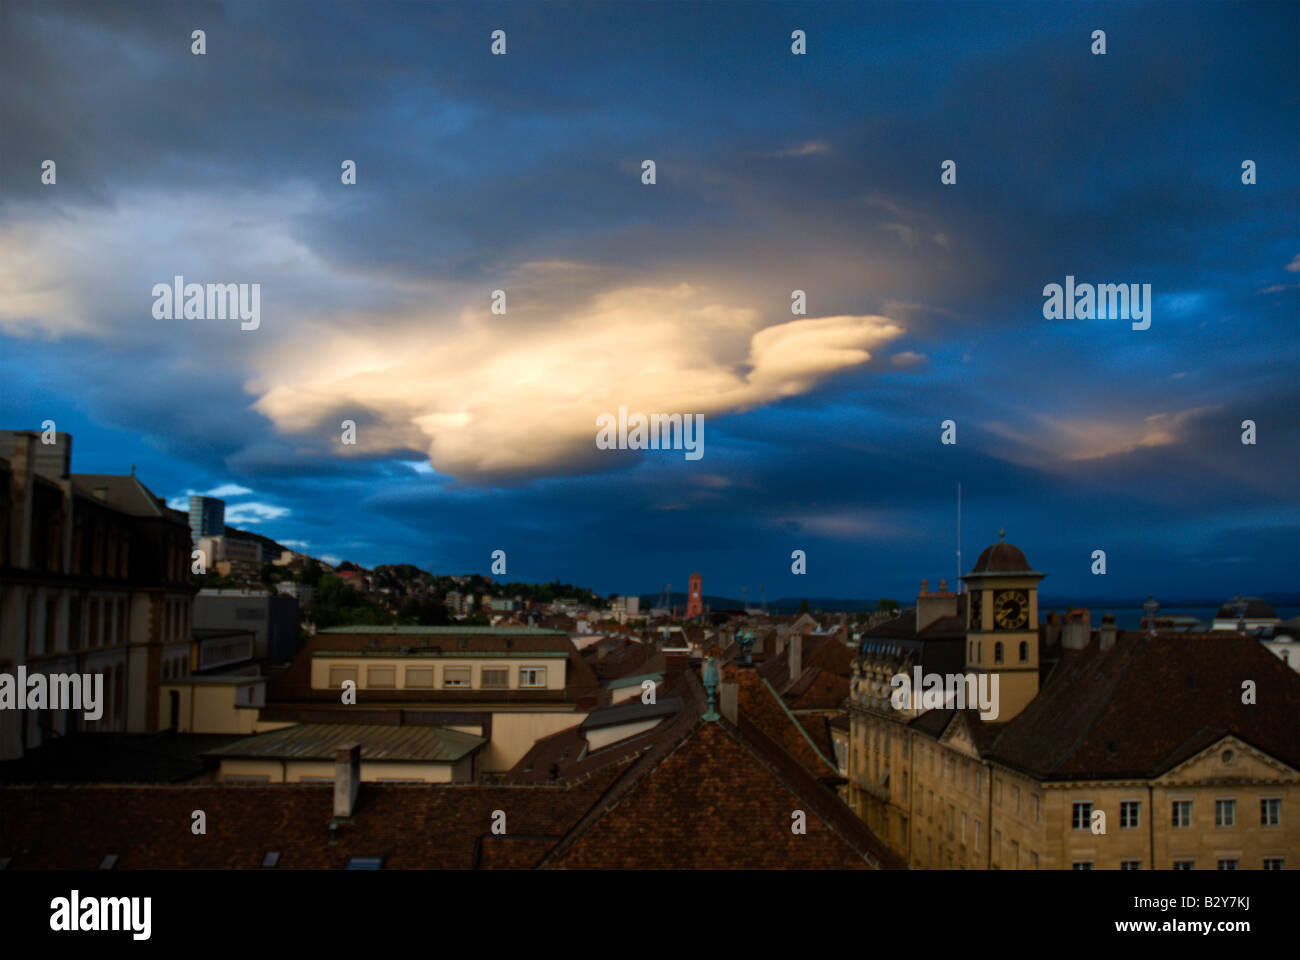 Beautiful blue sky with gray storm clouds passing over the city of Neuchatel, Switzerland.  Evening is approching. Stock Photo